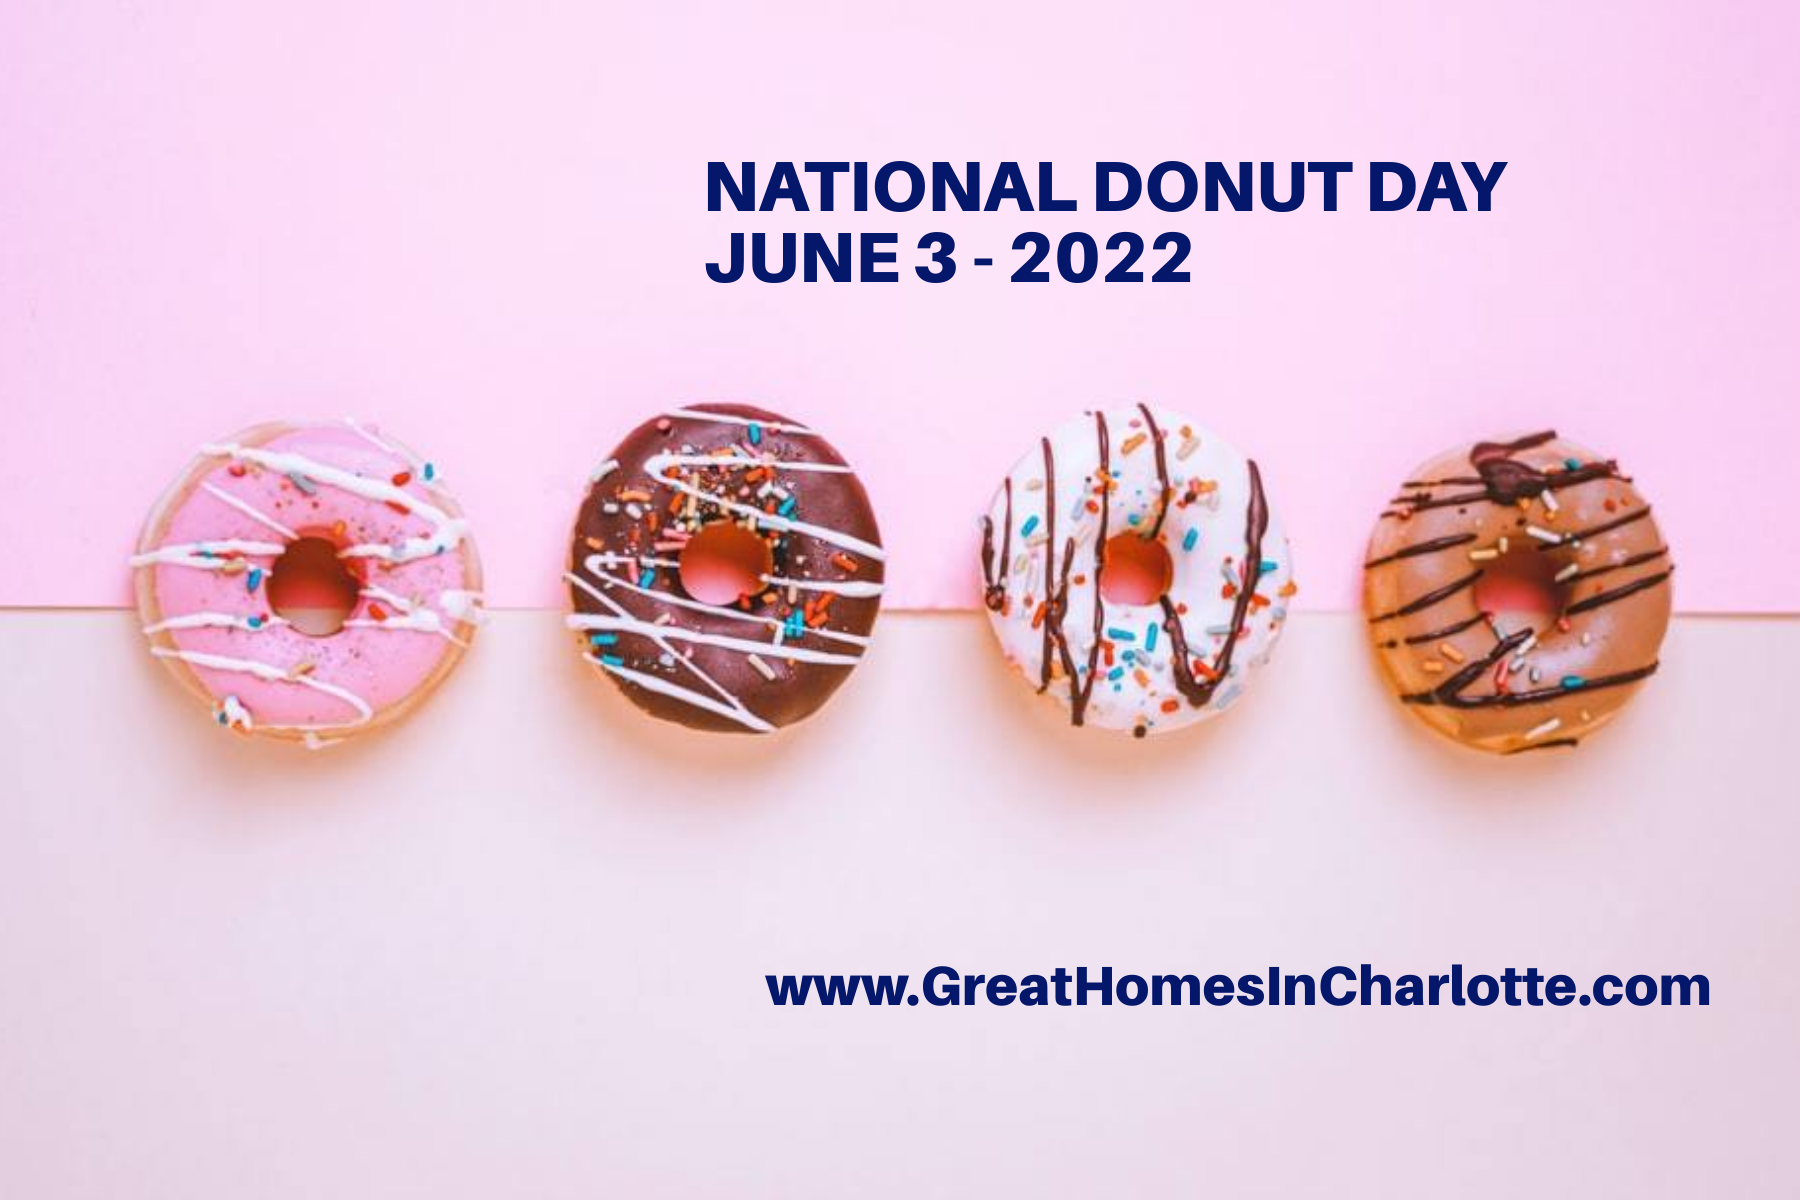 All About Donuts In Charlotte On National Donut Day